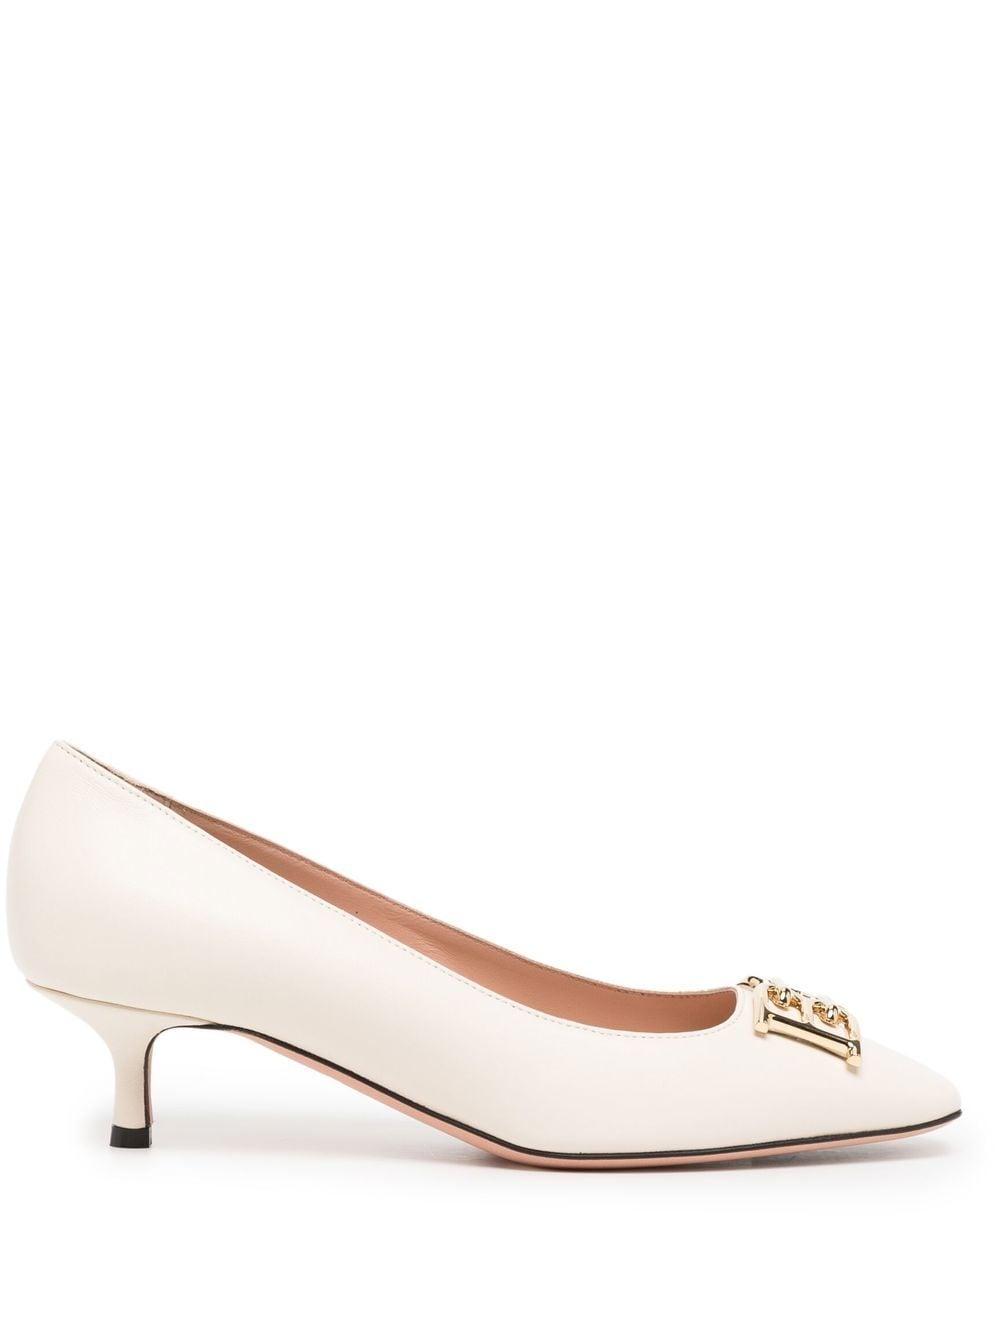 Bally Evanca 45 Leather Pumps in Pink | Lyst